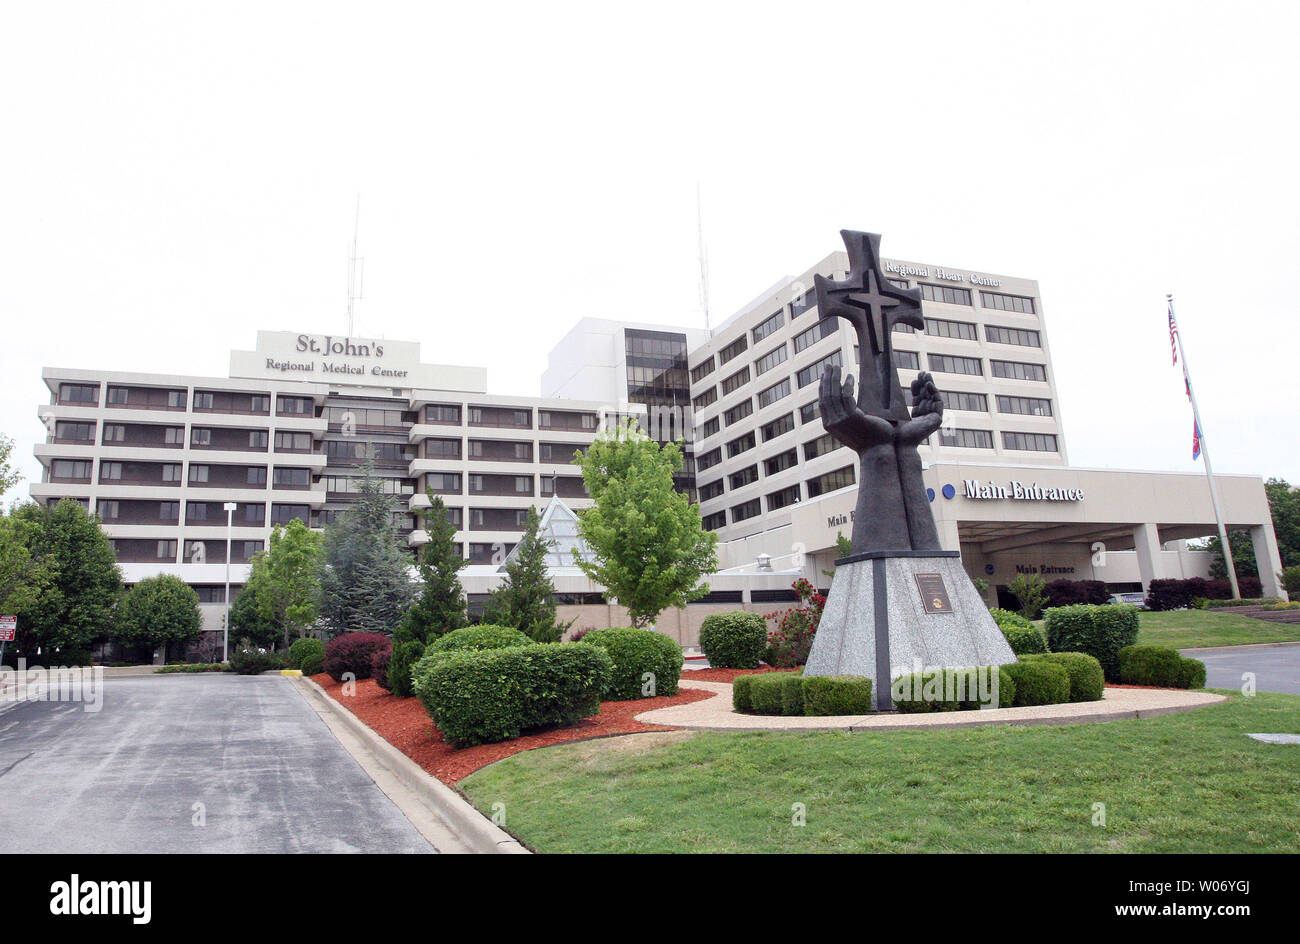 This file photo of St. John's Regional Medical Center in Joplin, Missouri as seen in June 2009. A EF-5 tornado that hit Joplin on May 22, has destroyed the facility and claimed 122 lives. UPI/Bill Greenblatt/FILES Stock Photo